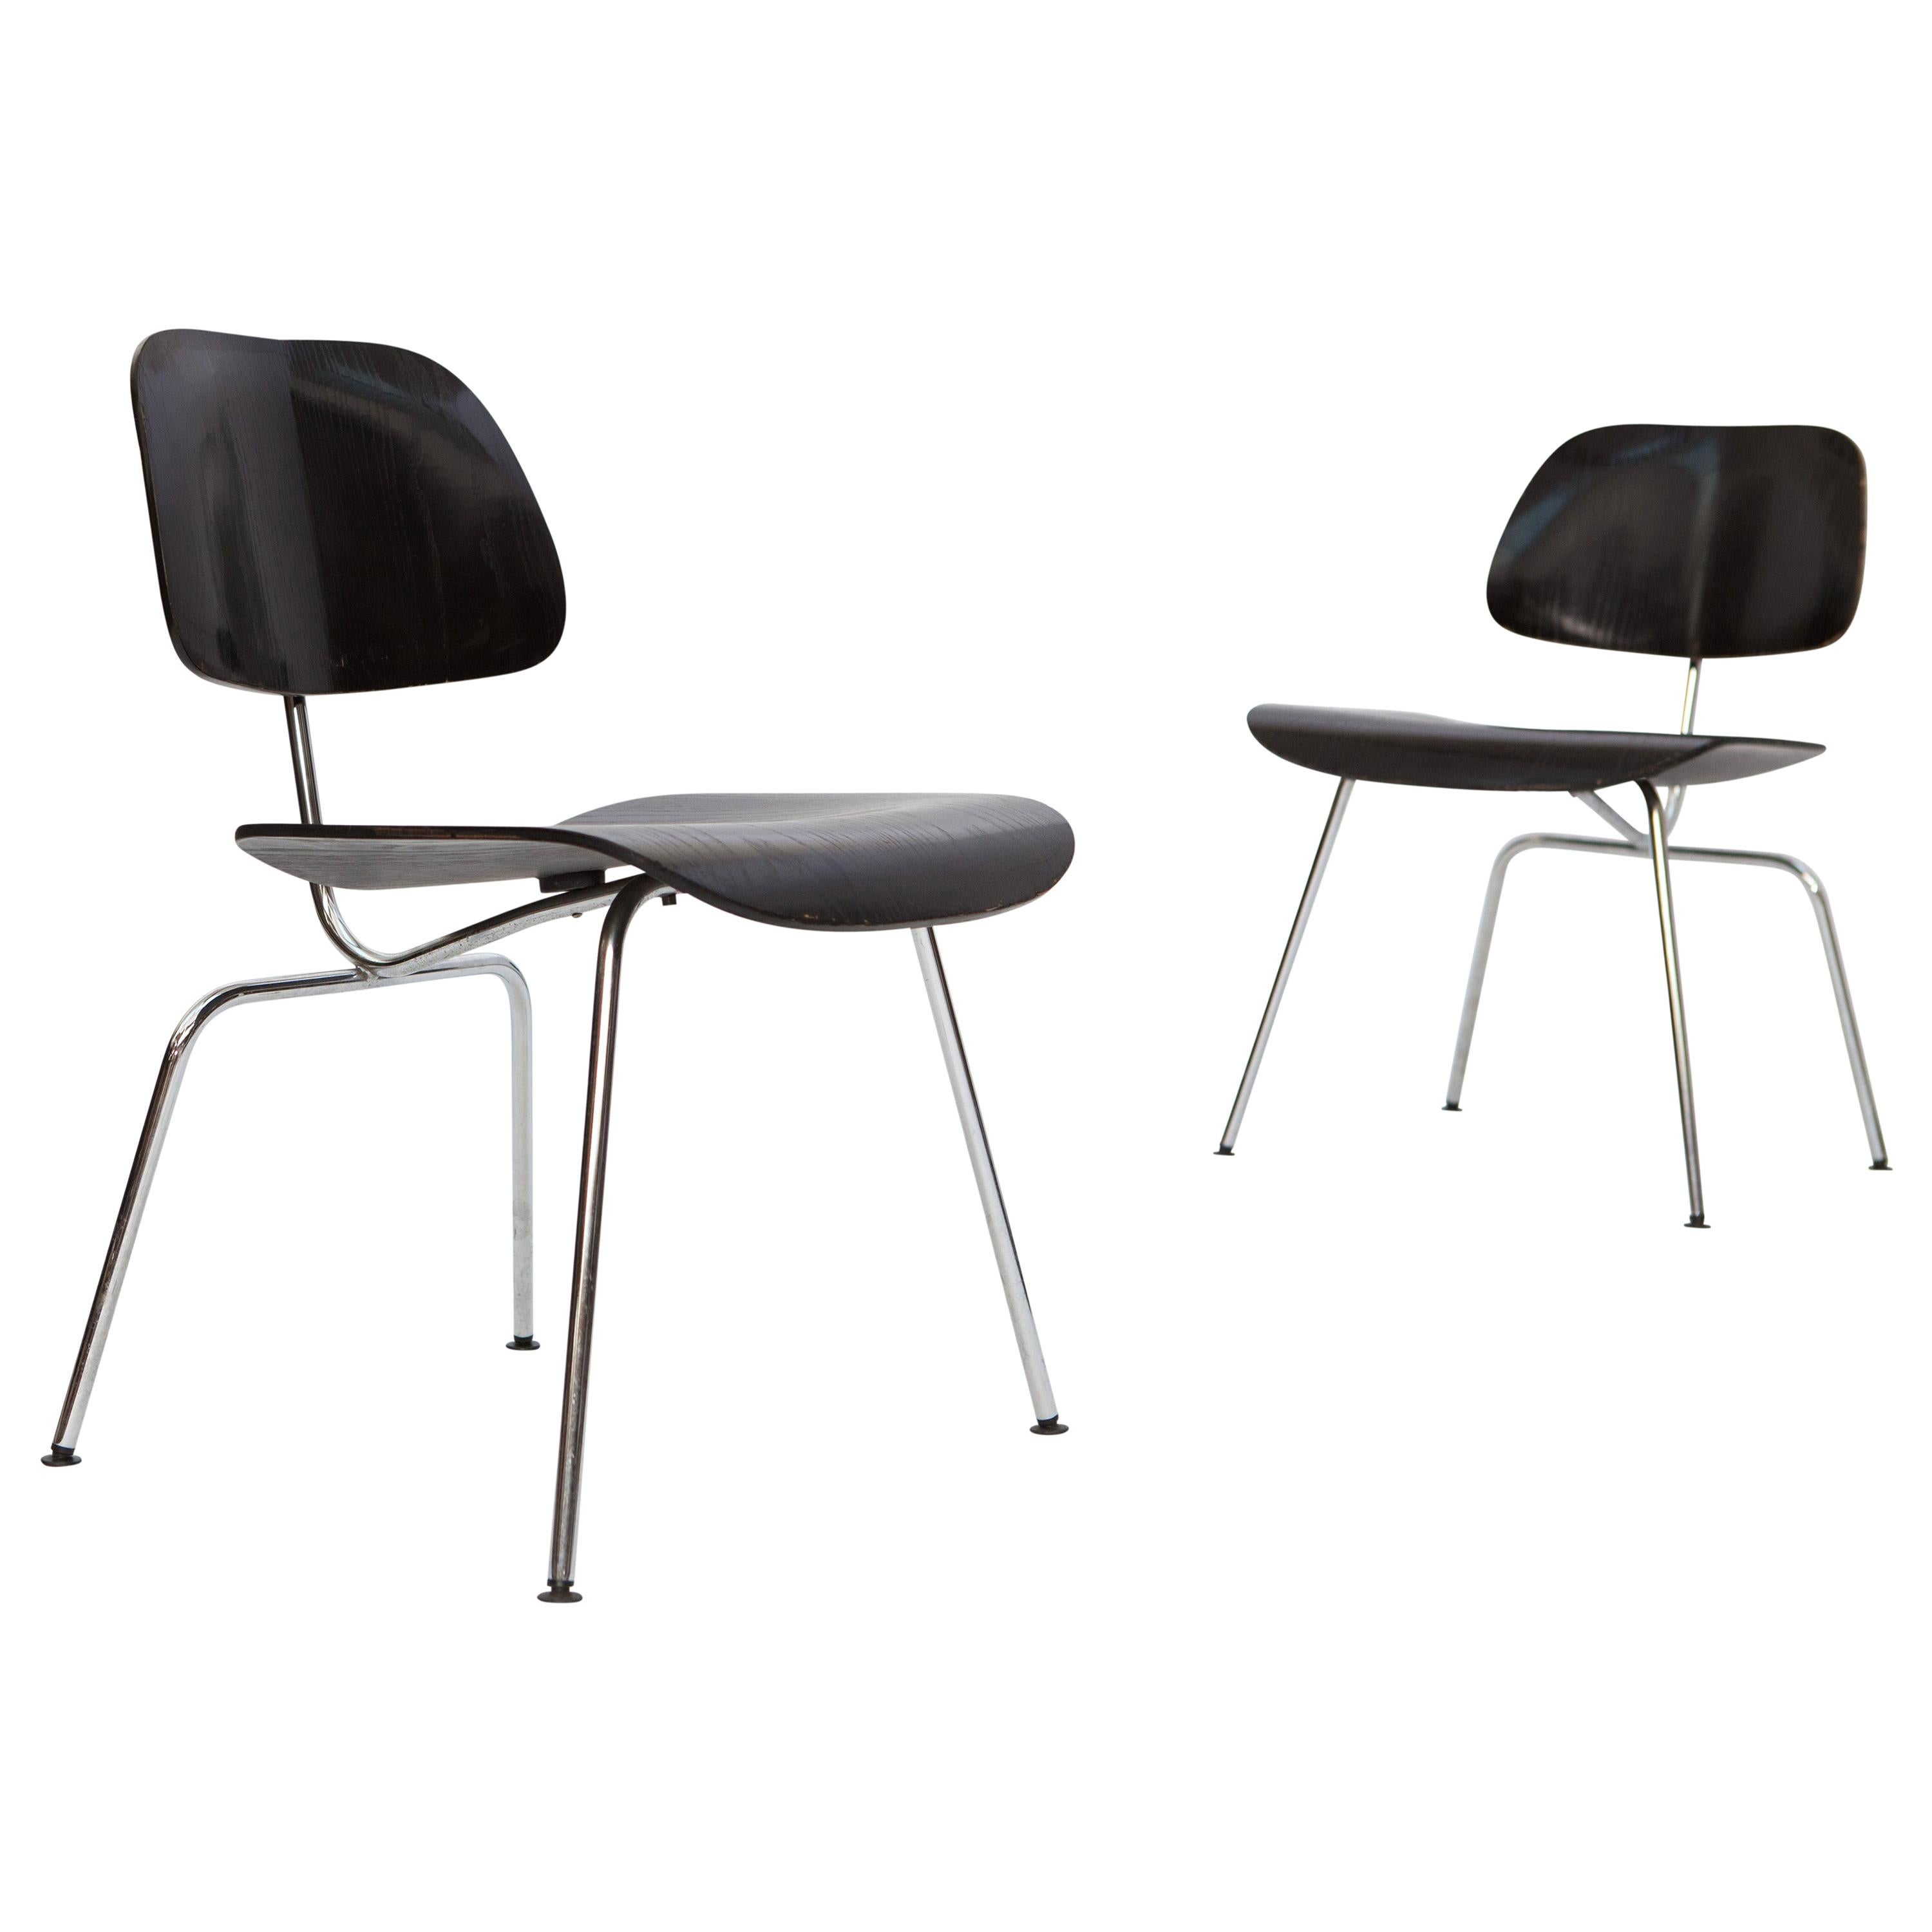 Set of Black Eames DMC Dining Chairs, Produced by Vitra